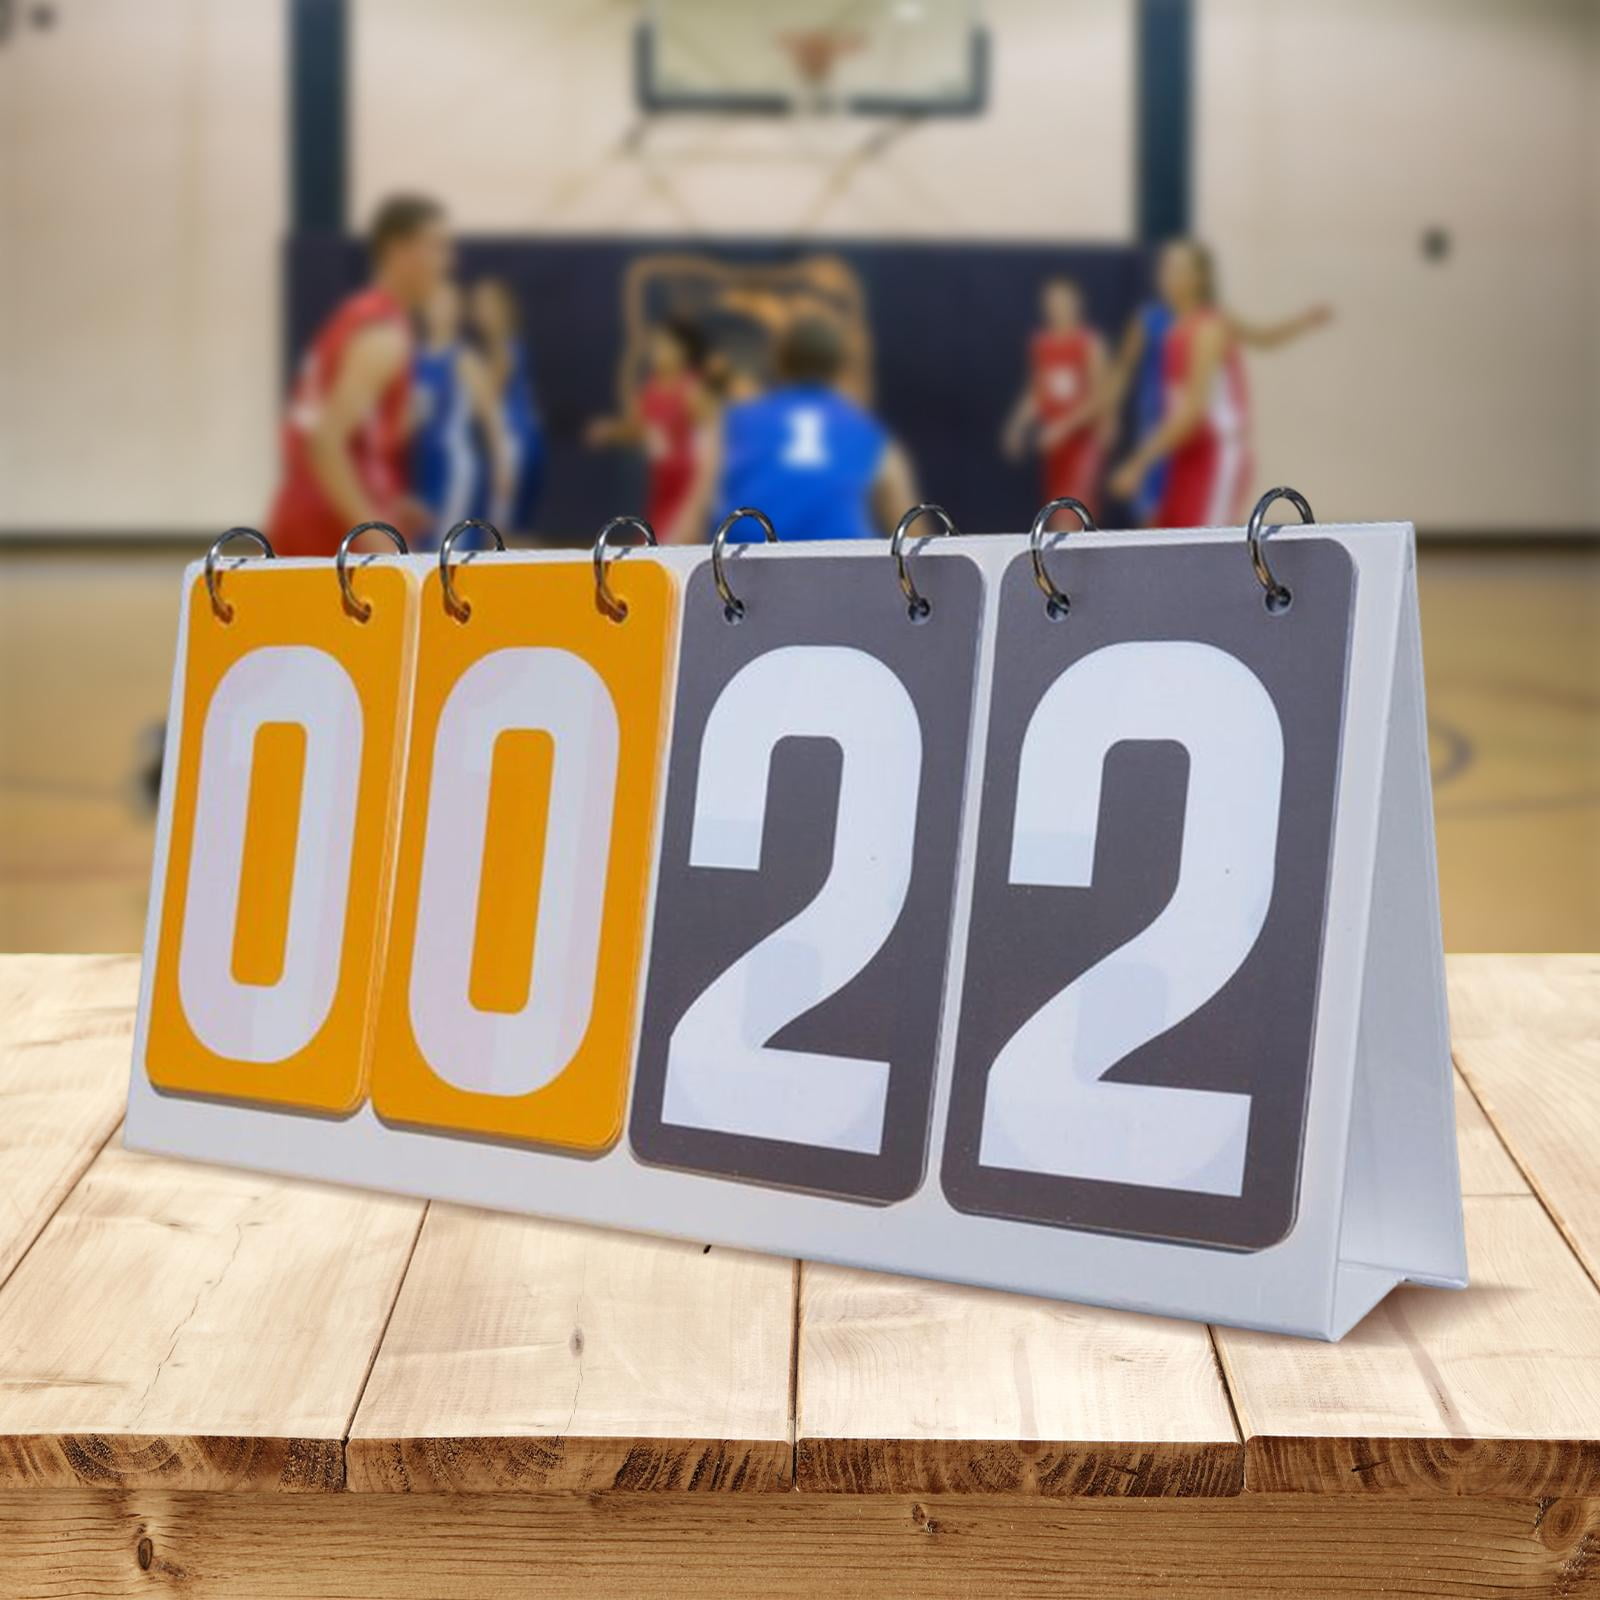 4 Digit Score Board Scoring Scorekeeper Competition Game Tabletop Scoreboard for Basketball Football Volleyball , Yellow Gray